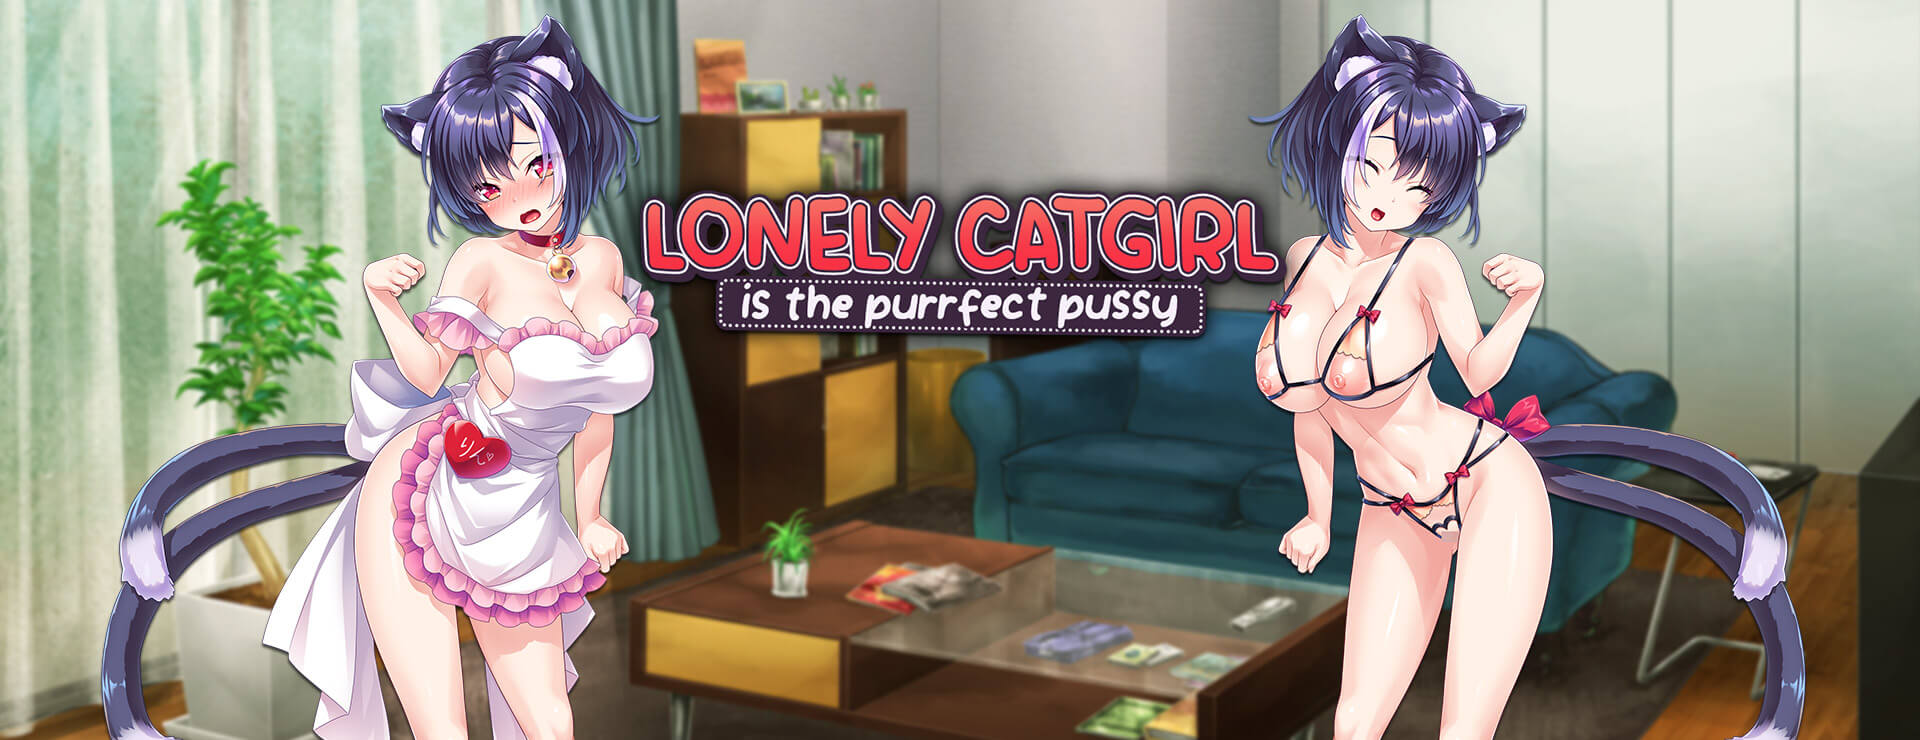 Lonely Catgirl is the Purrfect Pussy thumbnail